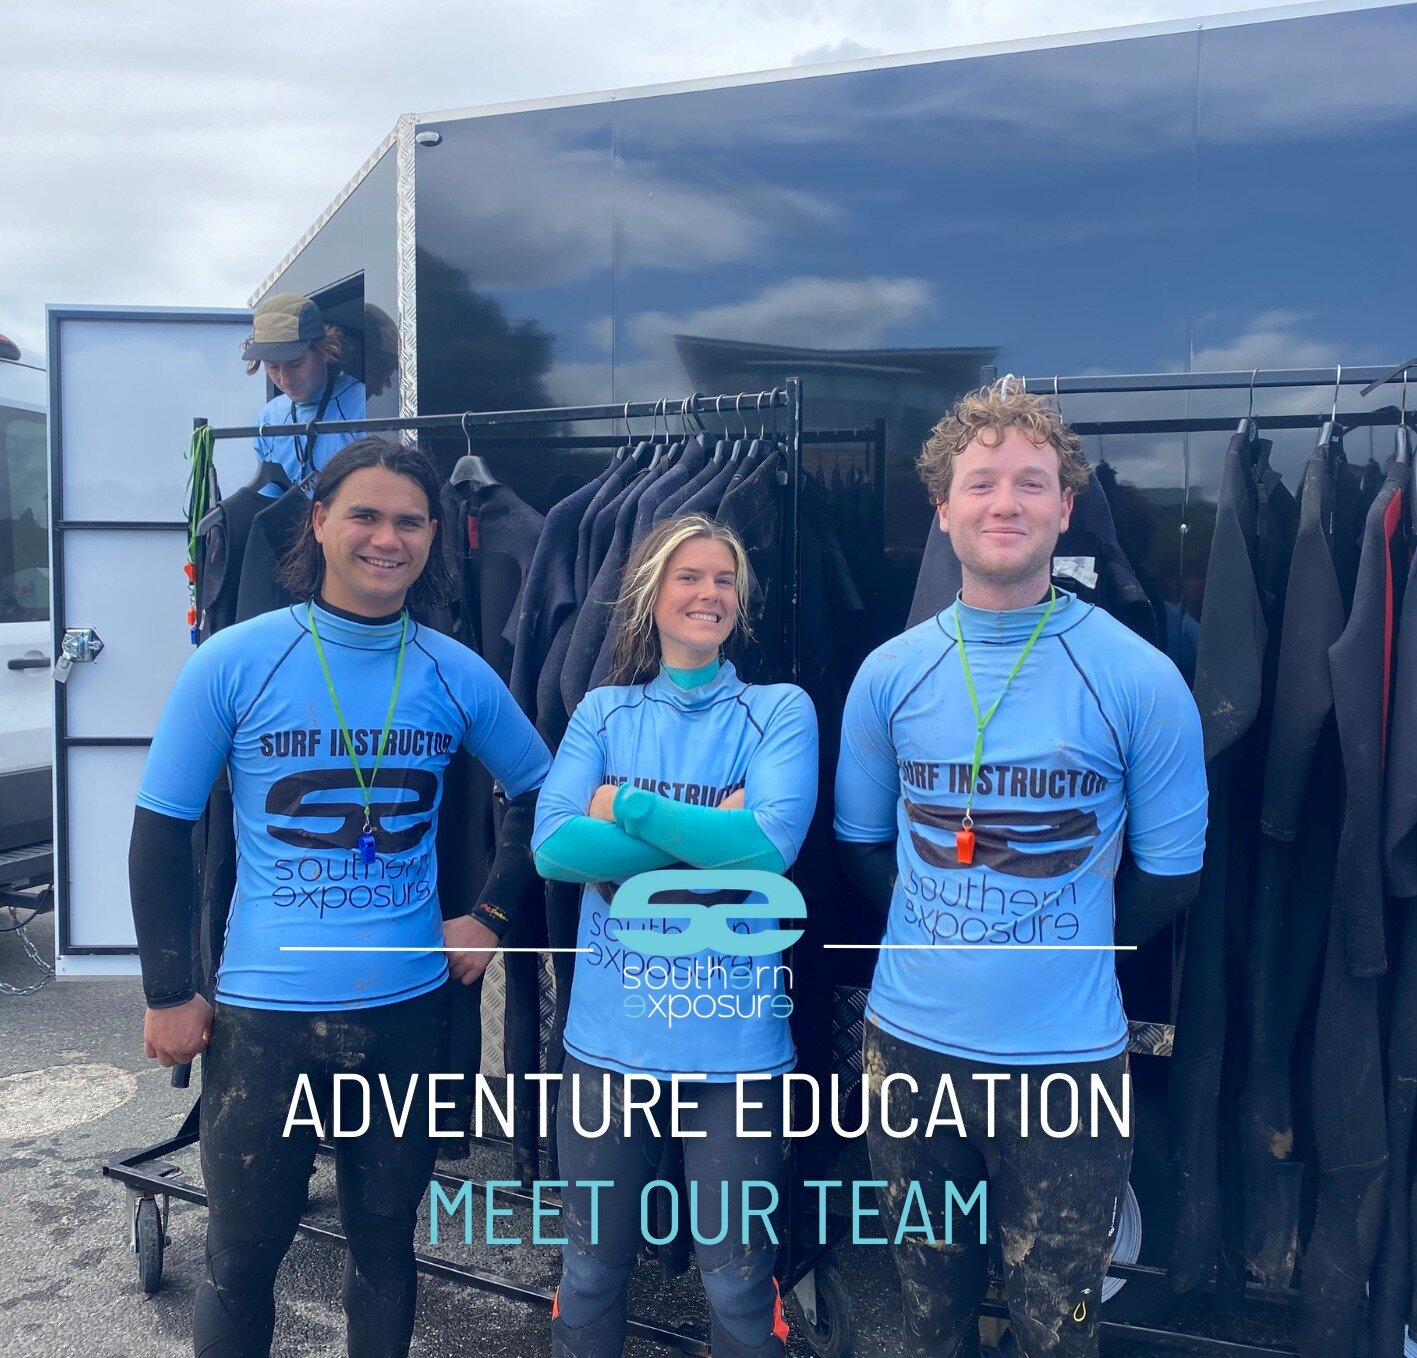 MEET OUR TEAM | SOUTHERN EXPOSURE

Our instructors can't wait to meet you! 

All of us have passion for adventure education and supporting students as they learn new skills, build confidence, all which support their physical and mental wellbeing, as 